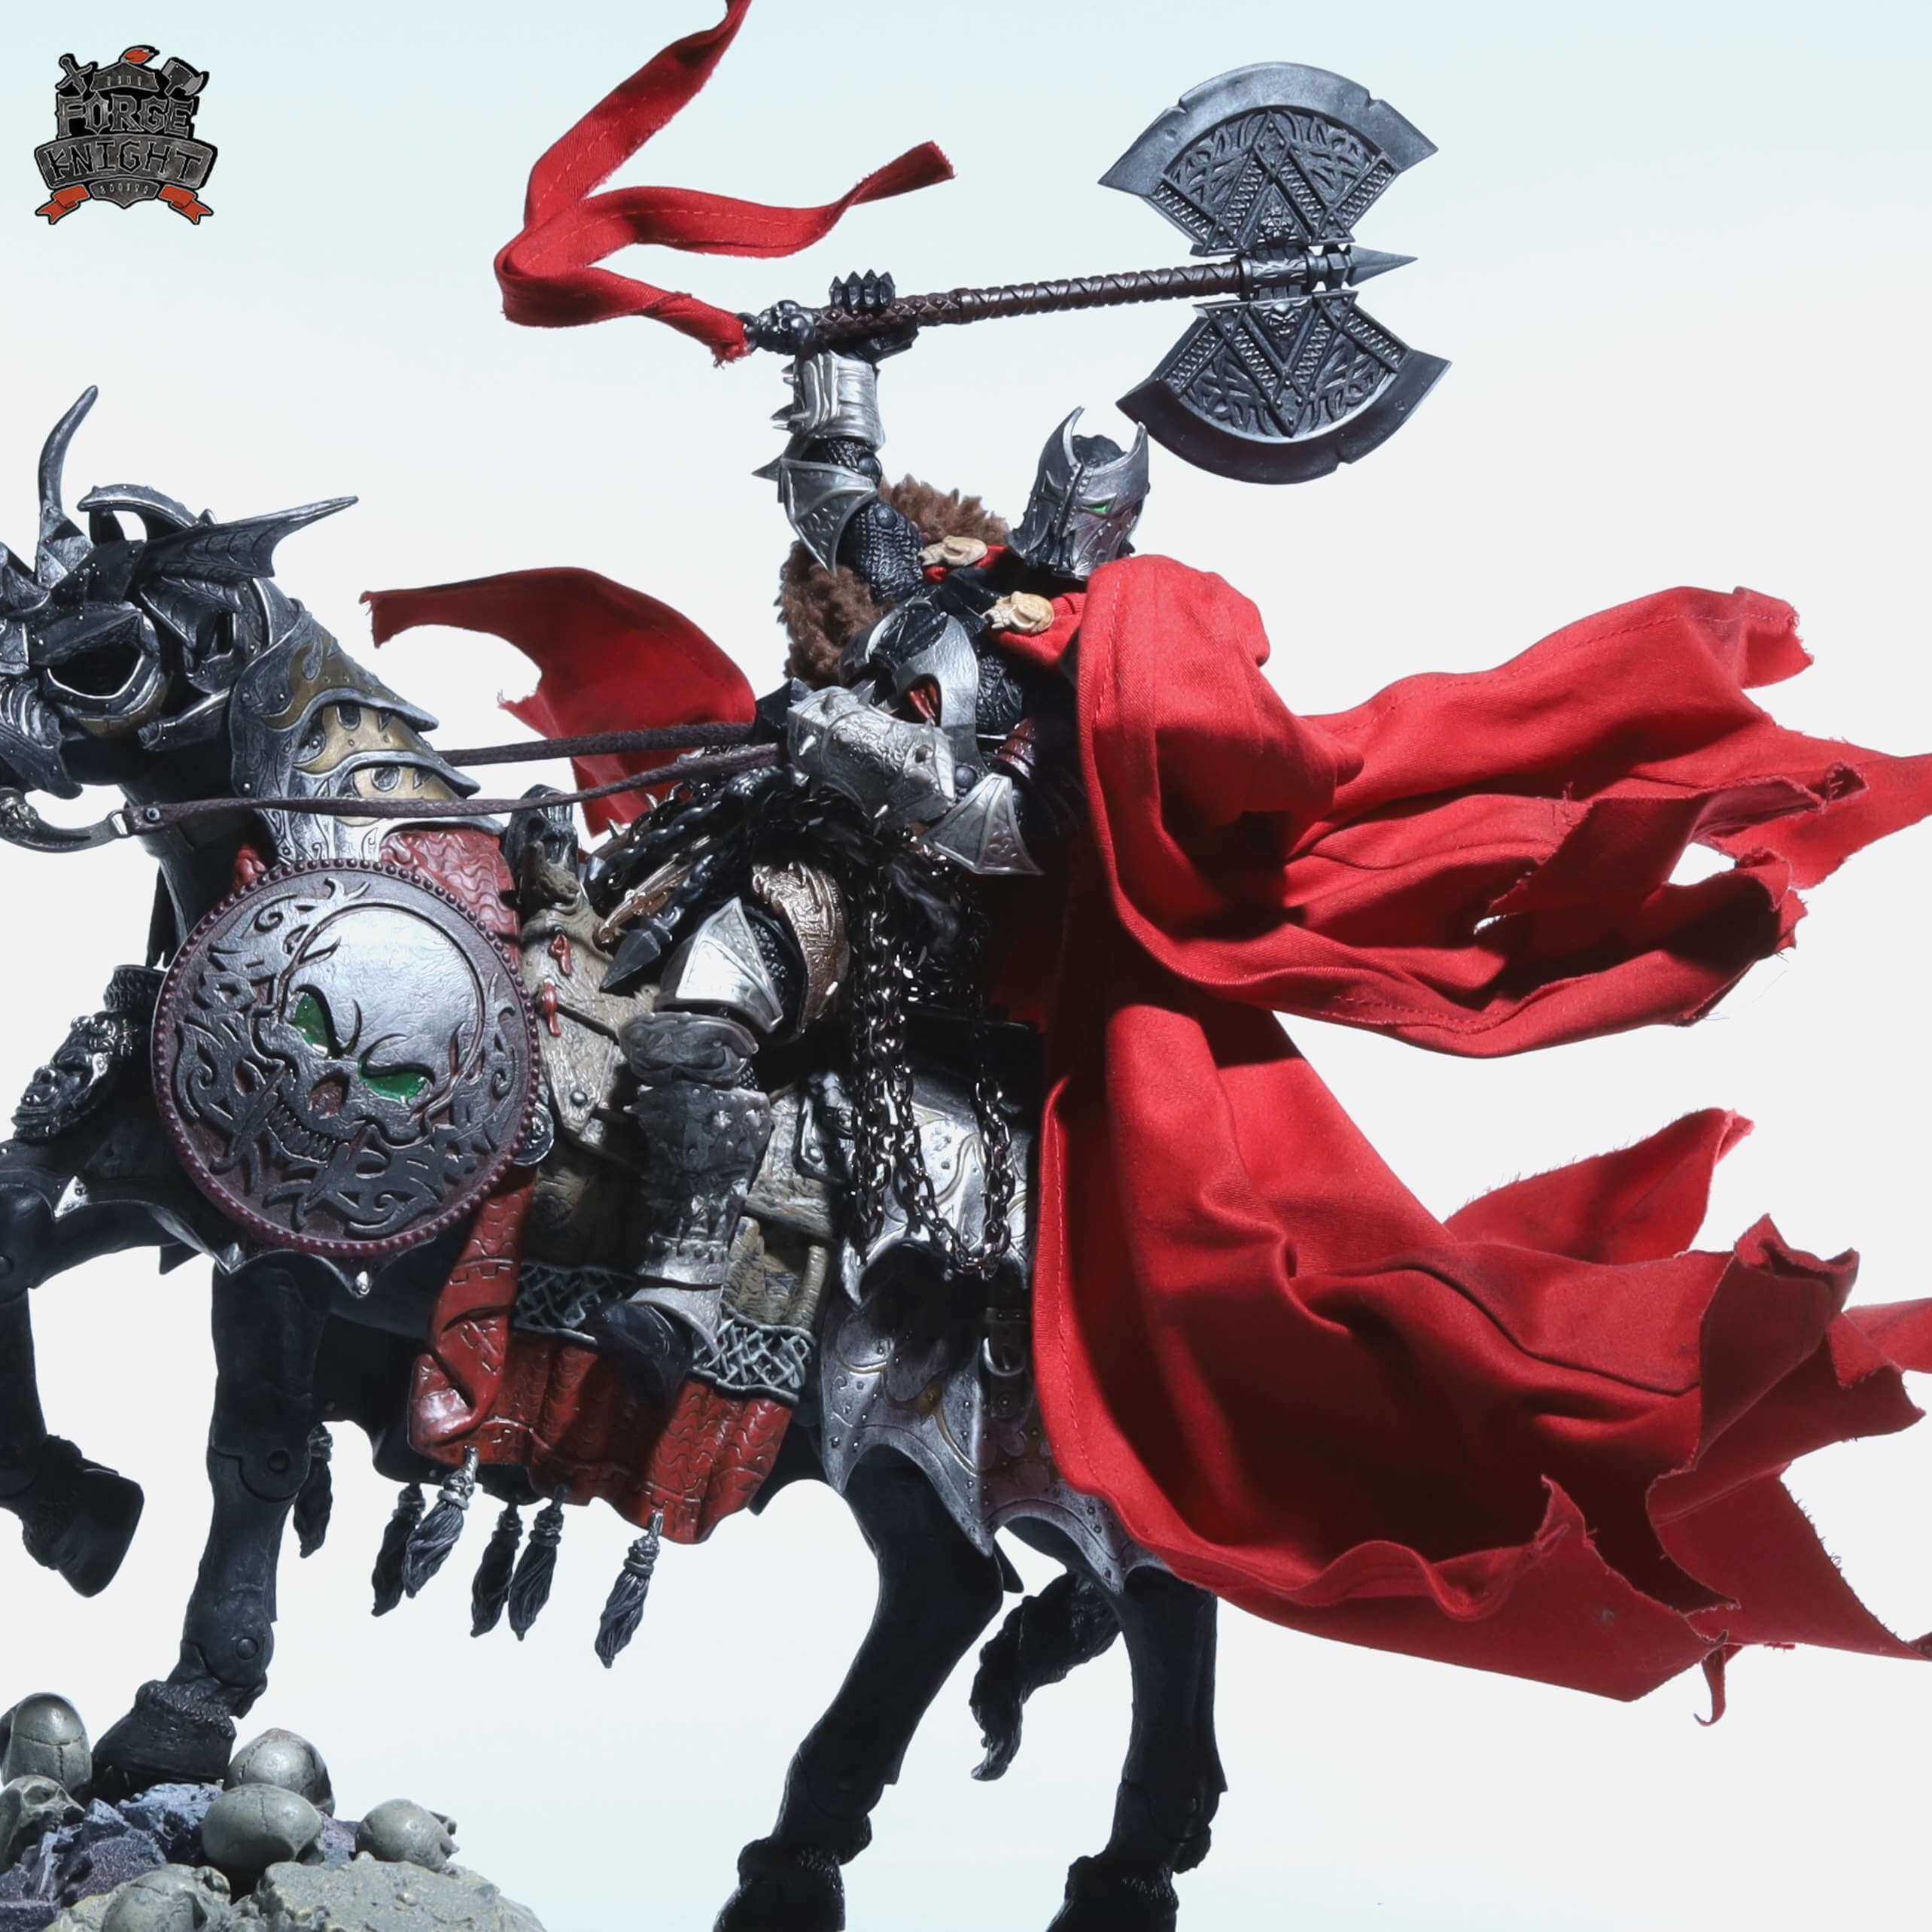 【READY FOR SHIP】【10%OFF】Custom cape set for Mcfarlane medieval Spawn